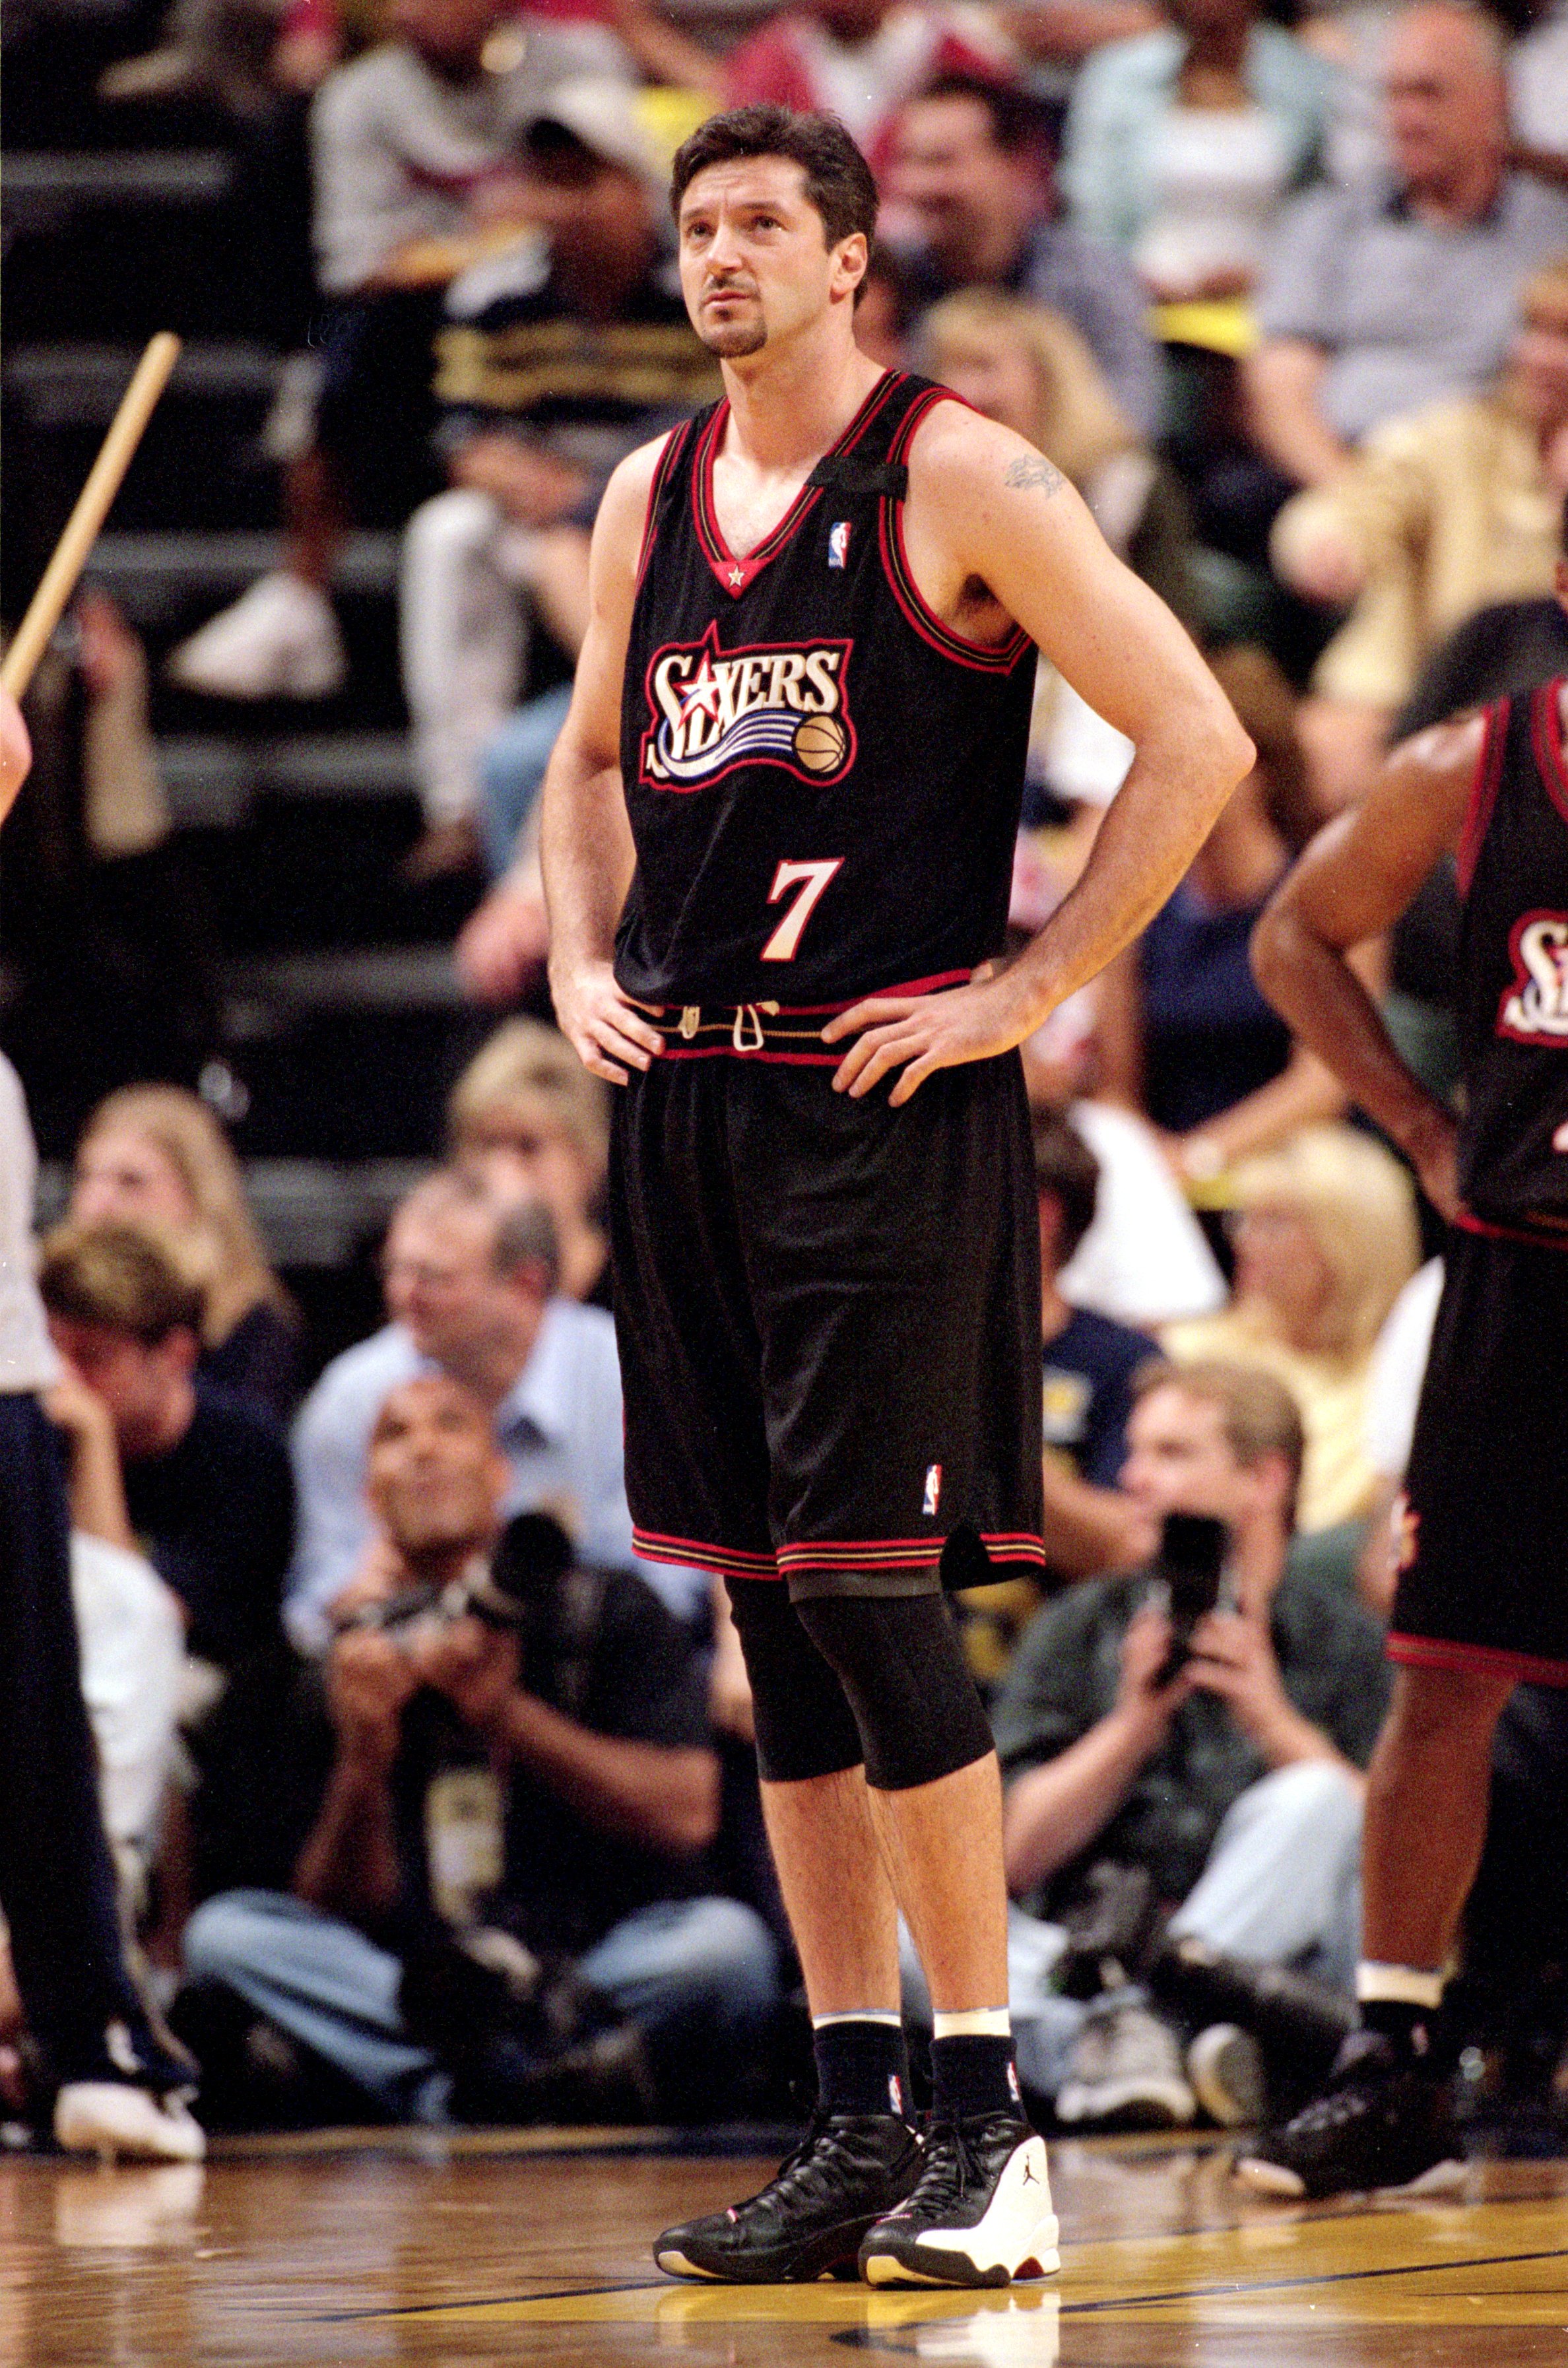 Toni Kukoc lawsuit alleges $11 million 'looting' by adviser and banker